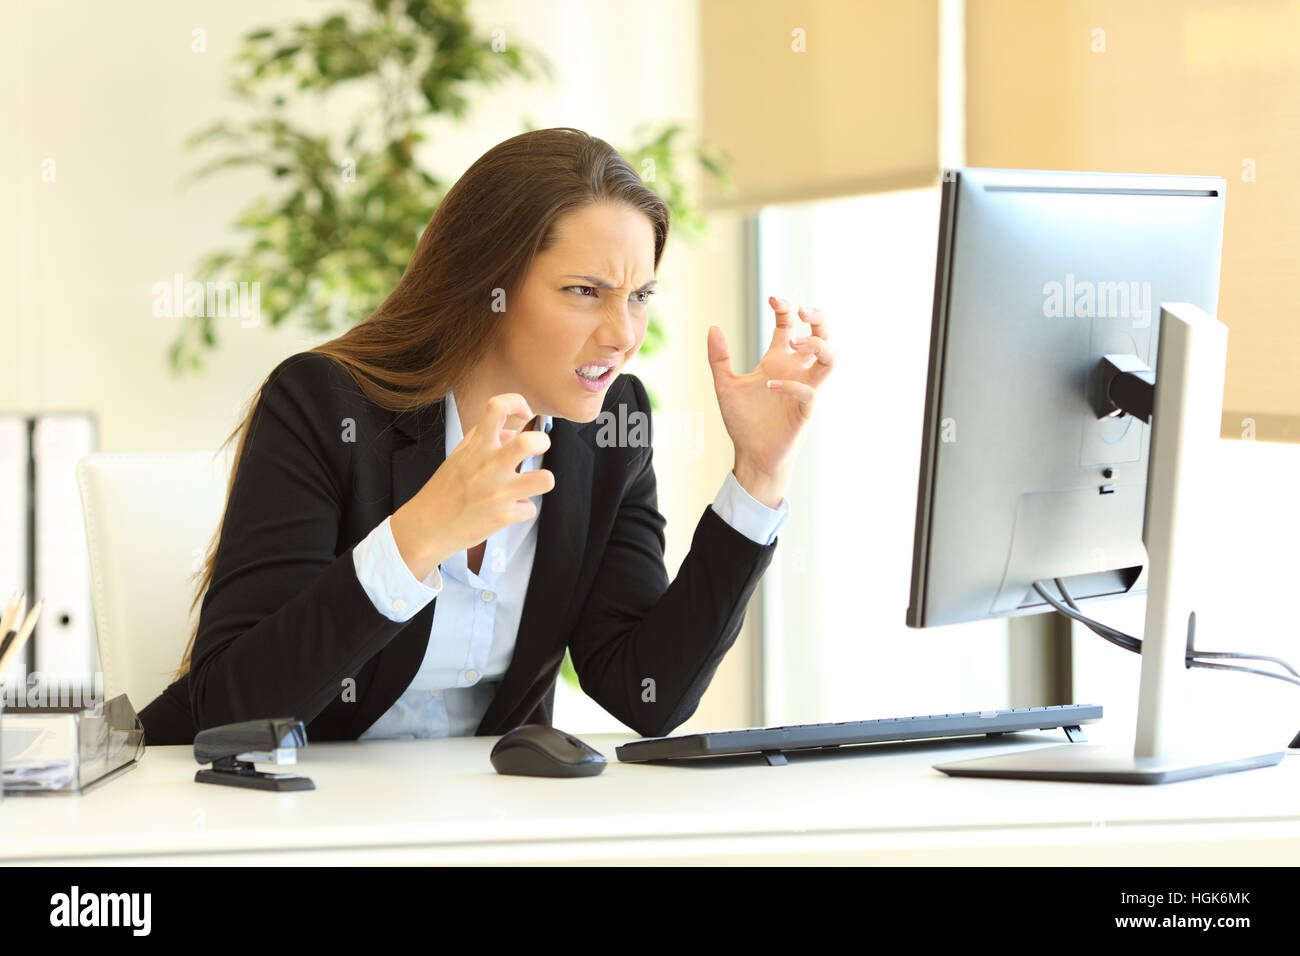 Furious businesswoman wearing suit using a desktop computer on line beside a window at office Stock Photo